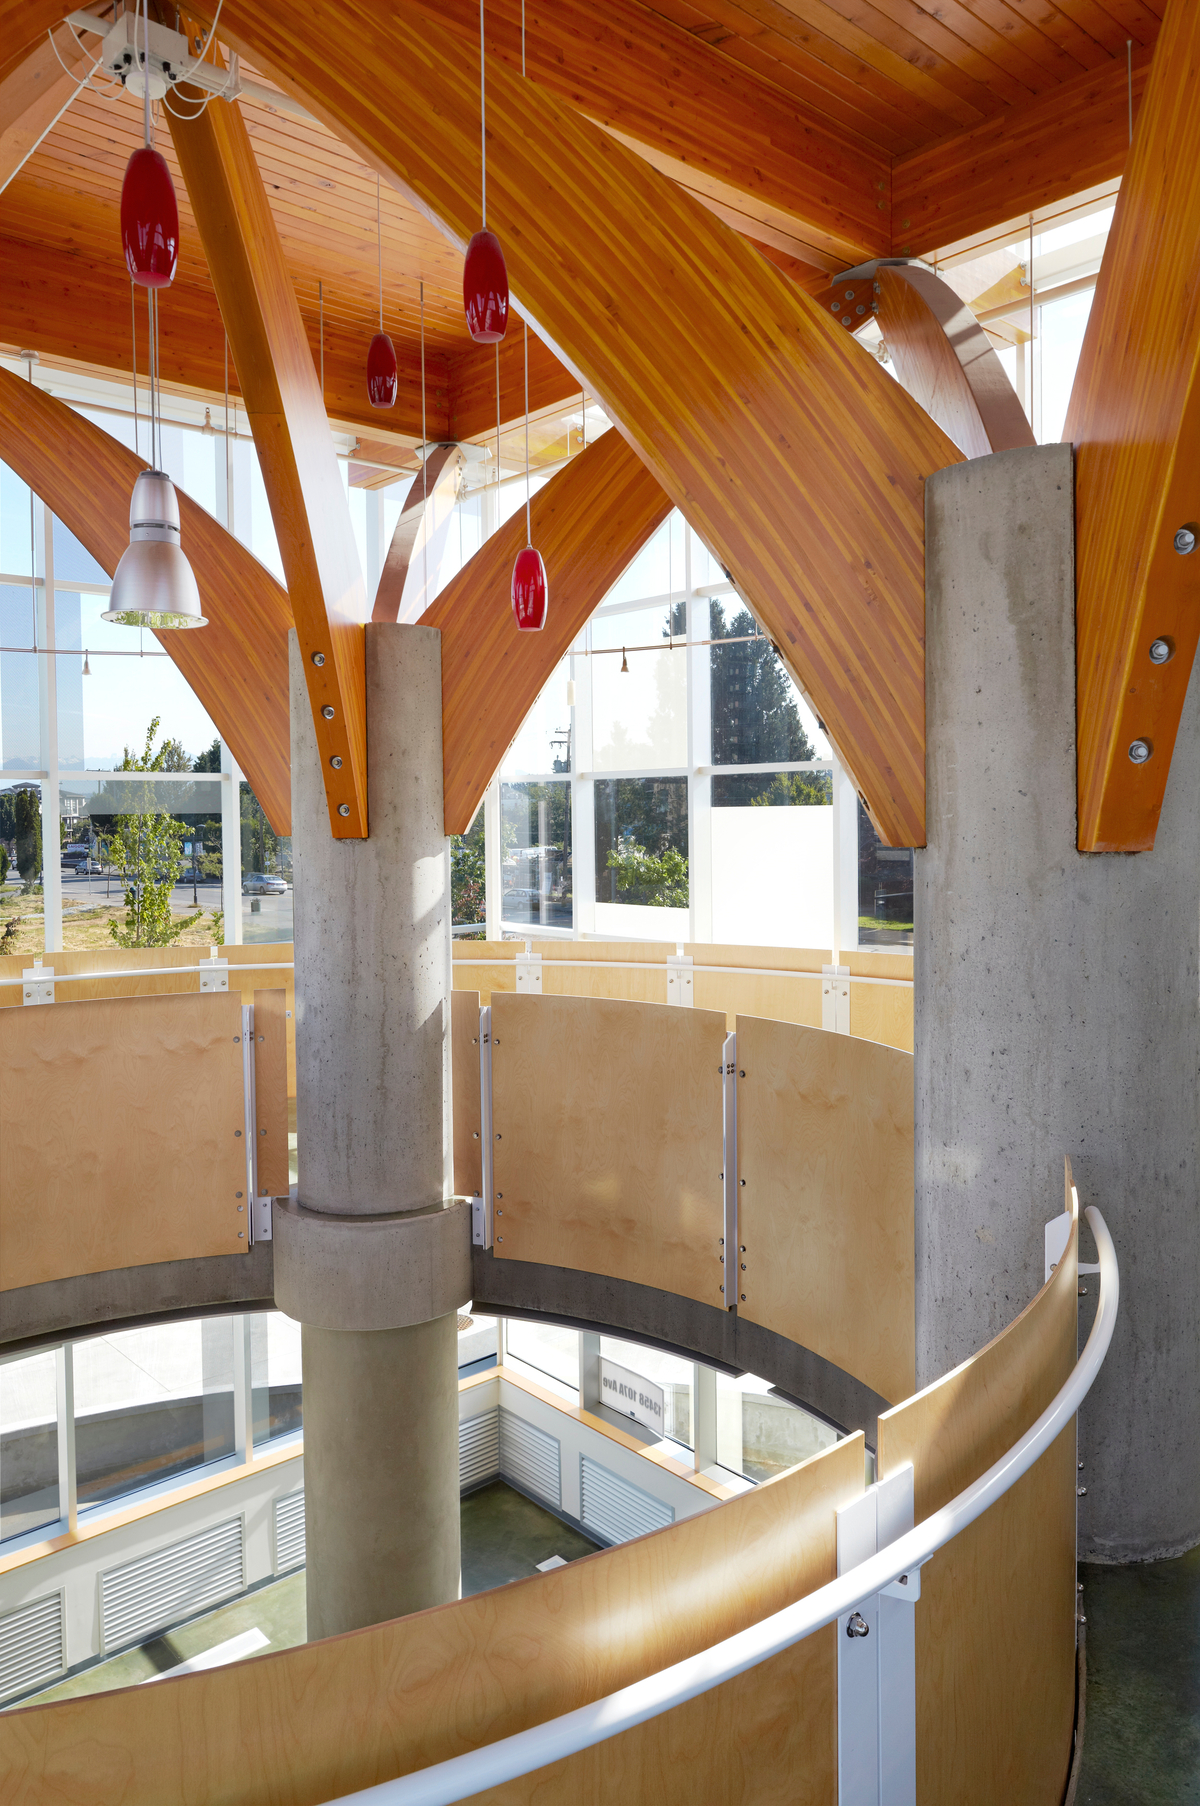 Interior sunny afternoon view of low rise Chuck Bailey Recreation Centre featuring massive structural Glue-laminated timber (Glulam) roof supports atop concrete columns